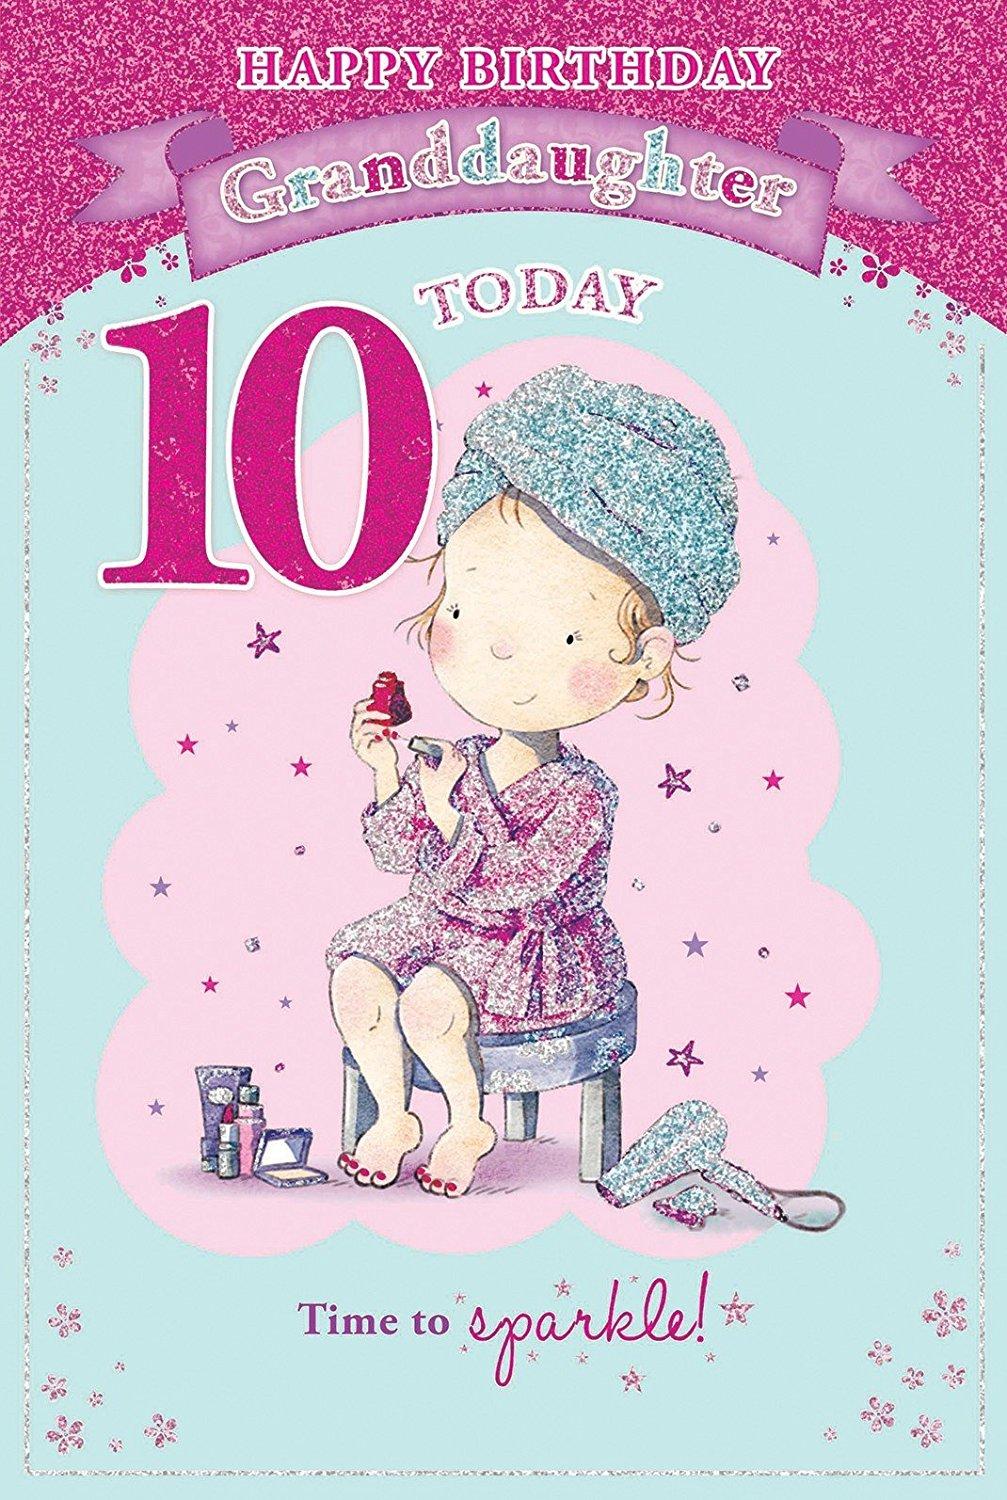 Happy Birthday Granddaughter image- Free bday cards and picture